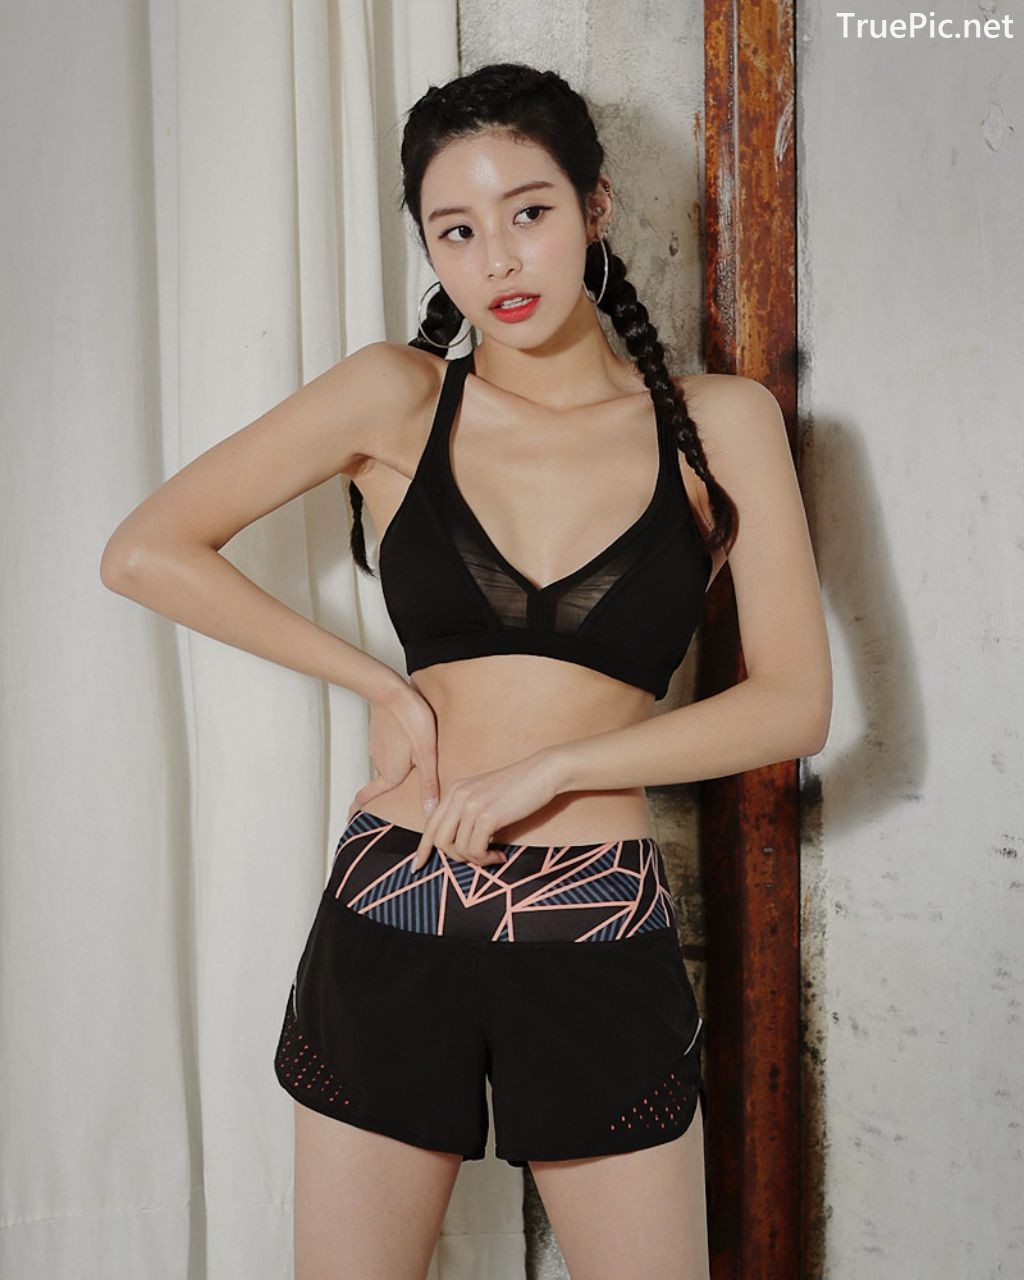 Image-Korean-Fashion-Model-Ju-Woo-Fitness-Set-Collection-TruePic.net- Picture-31